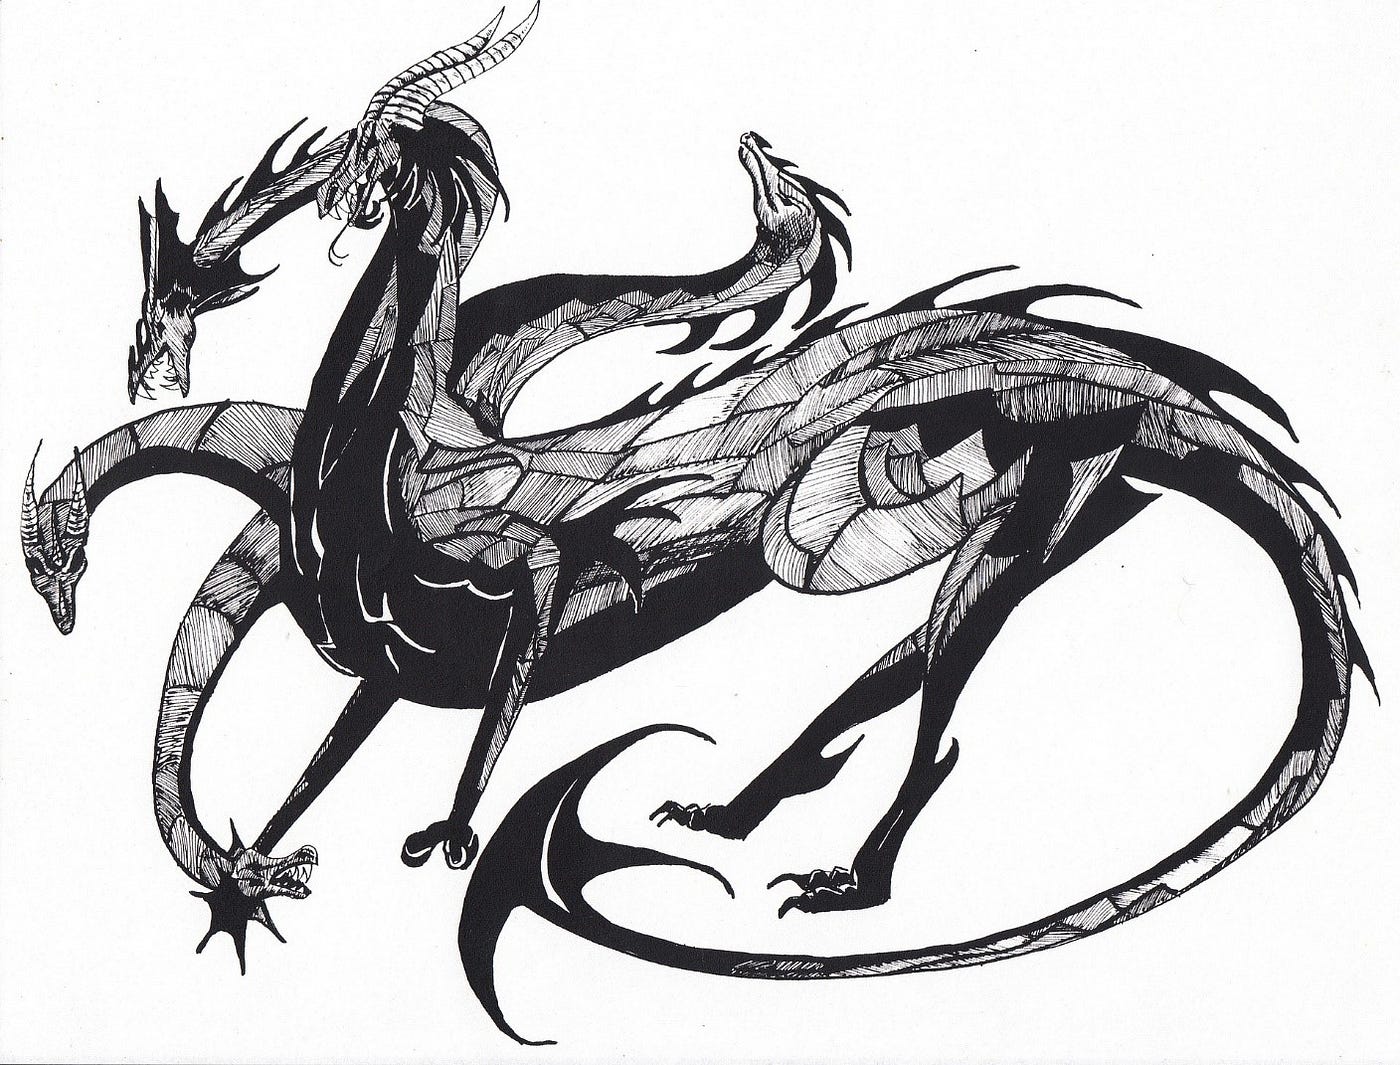 A graphic containing imagery of a Hydra with european style dragon characteristics.